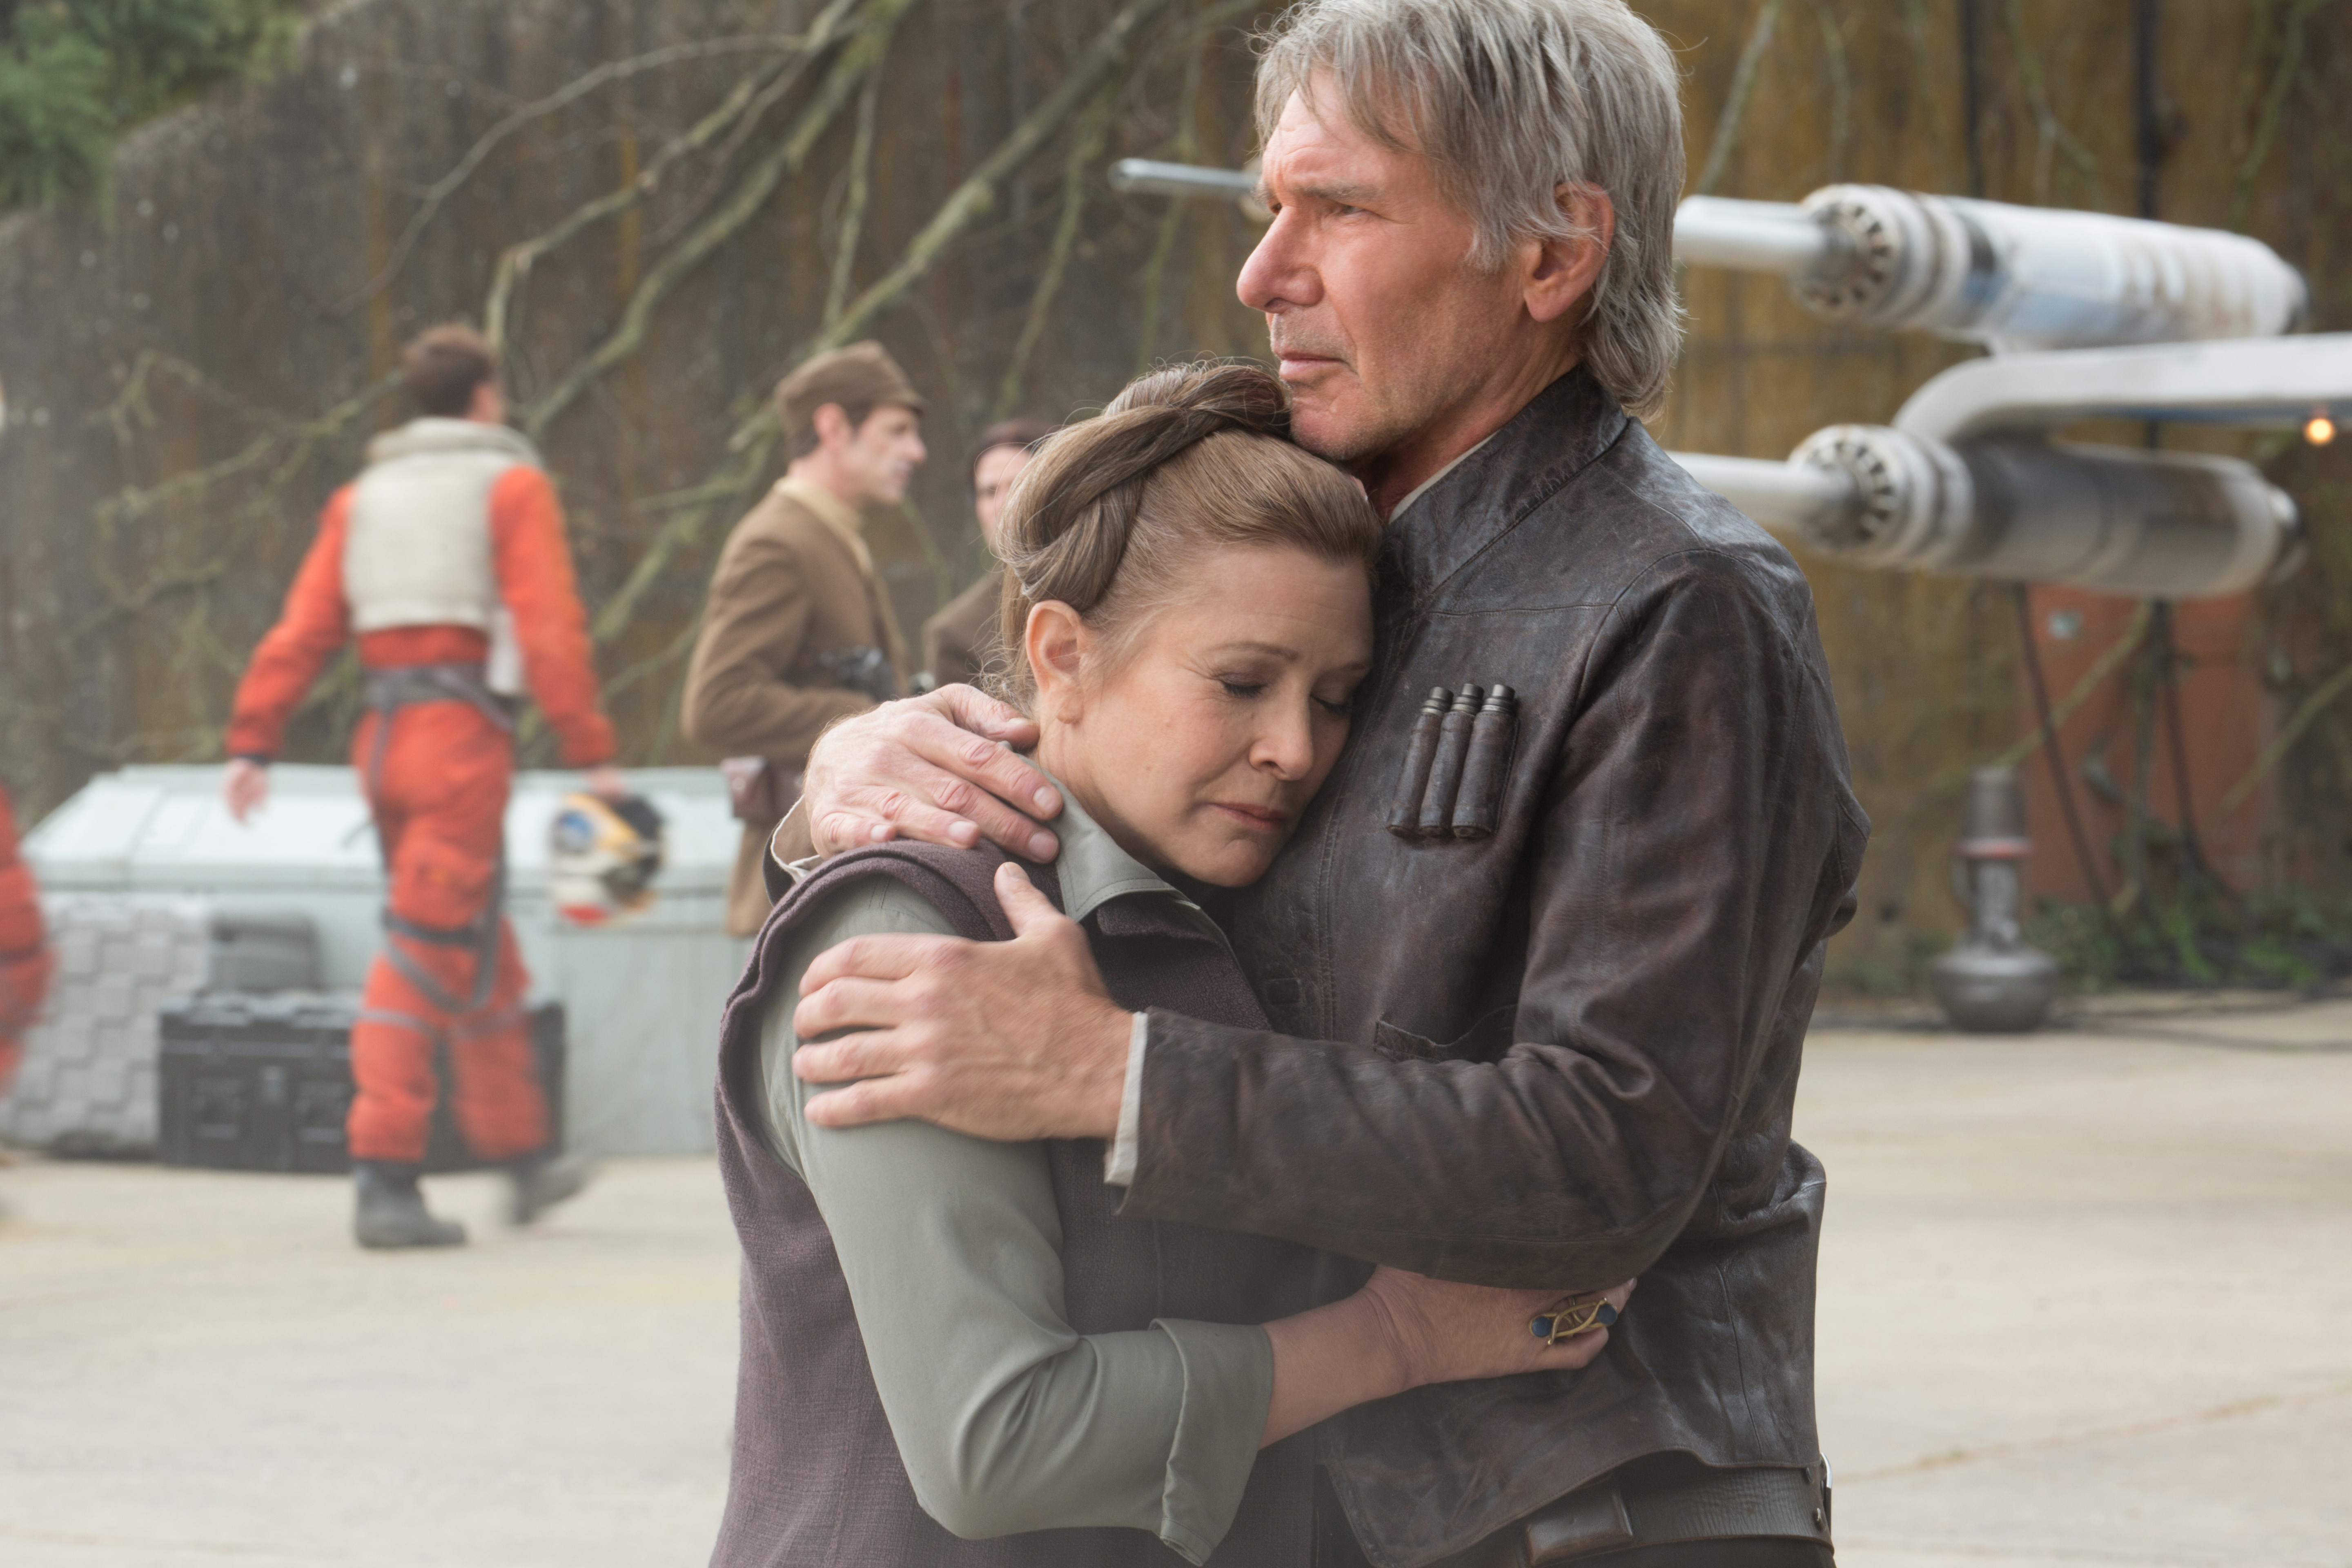 Star Wars Episode Vii The Force Awakens Star Wars Han Solo Harrison Ford Carrie Fisher Princess Leia 5760x3840